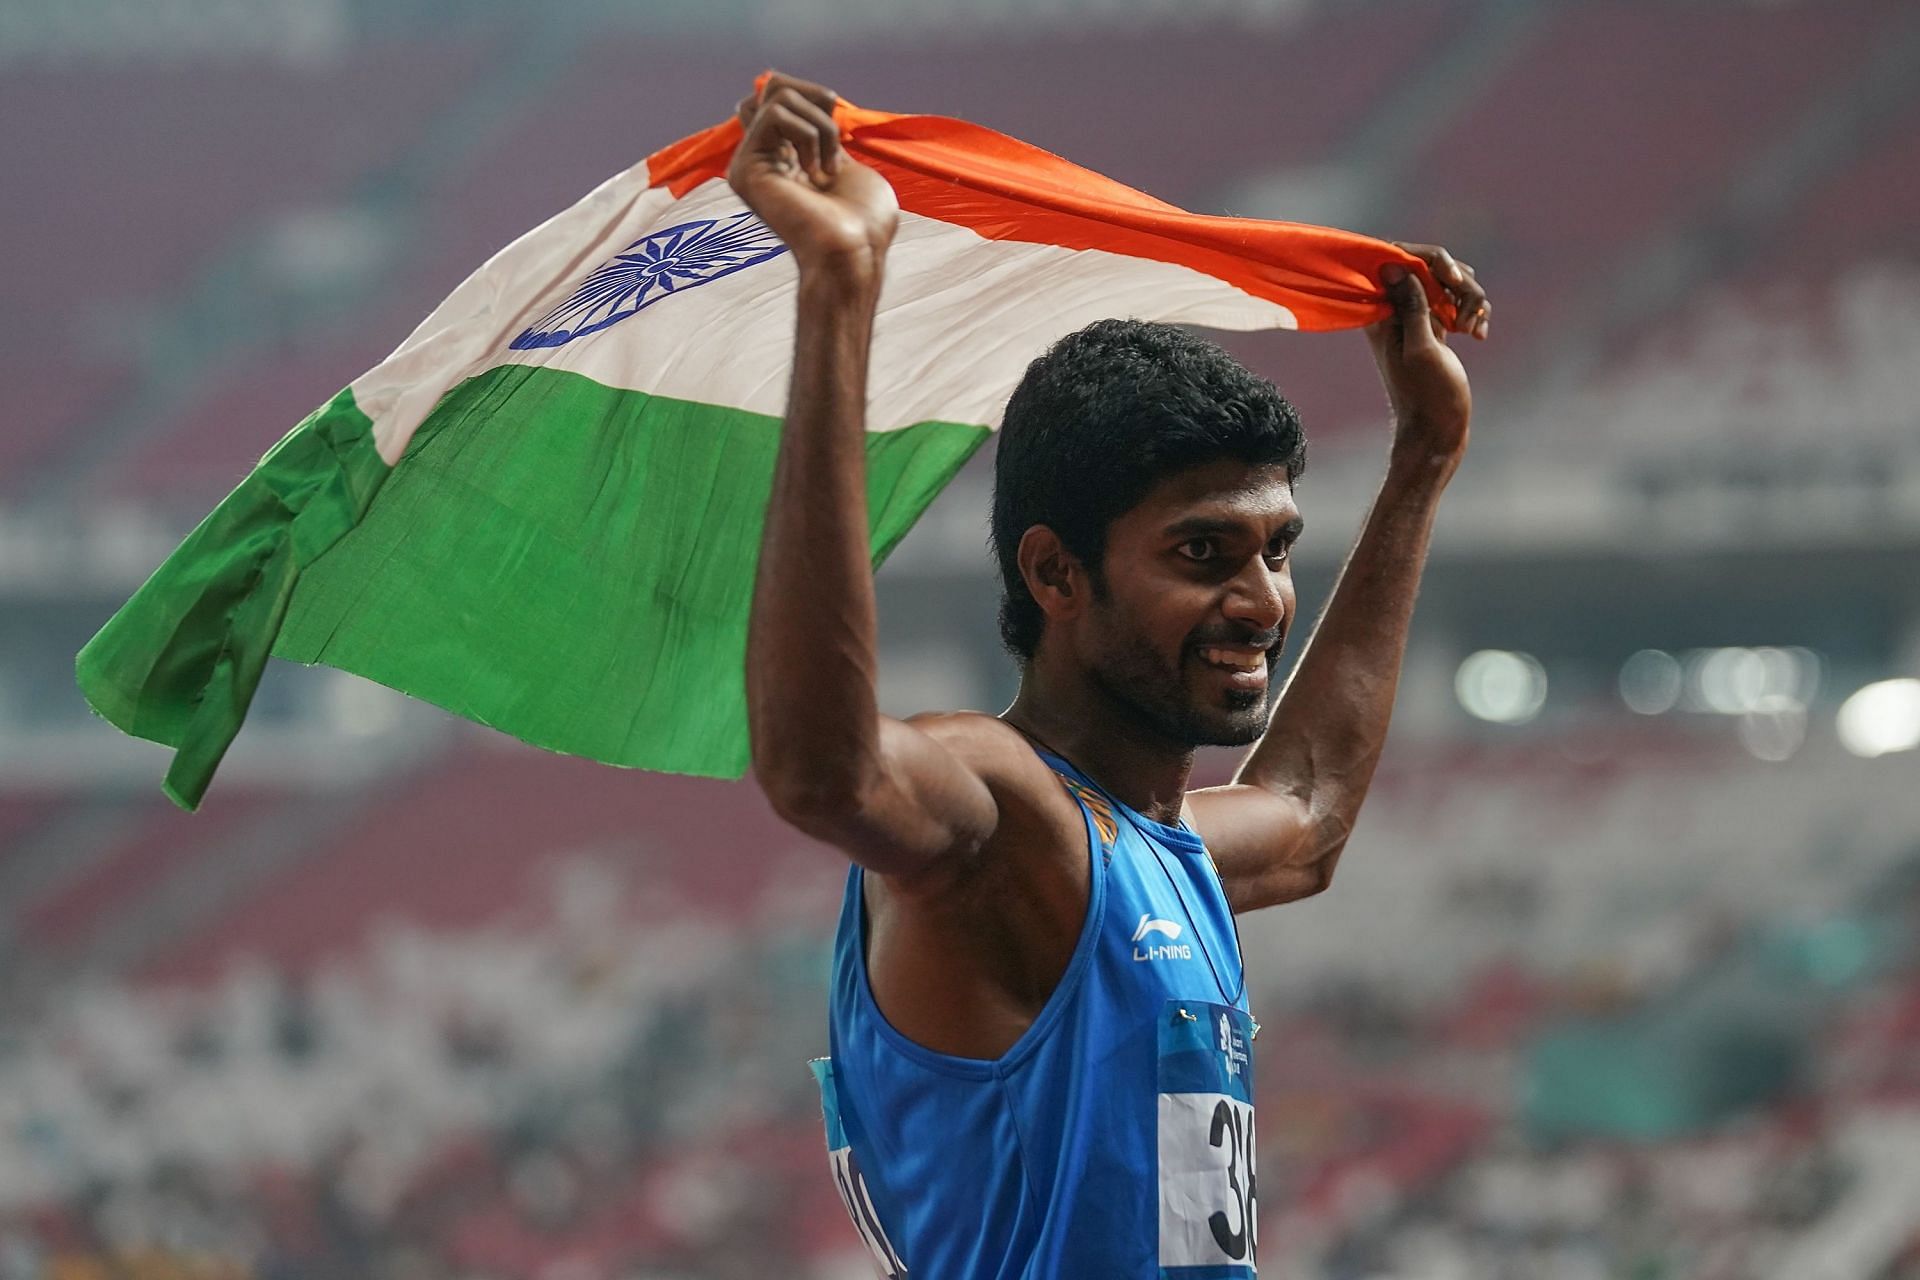 Jinson Johnson celebrates winning a medal at the 2018 Asian Games